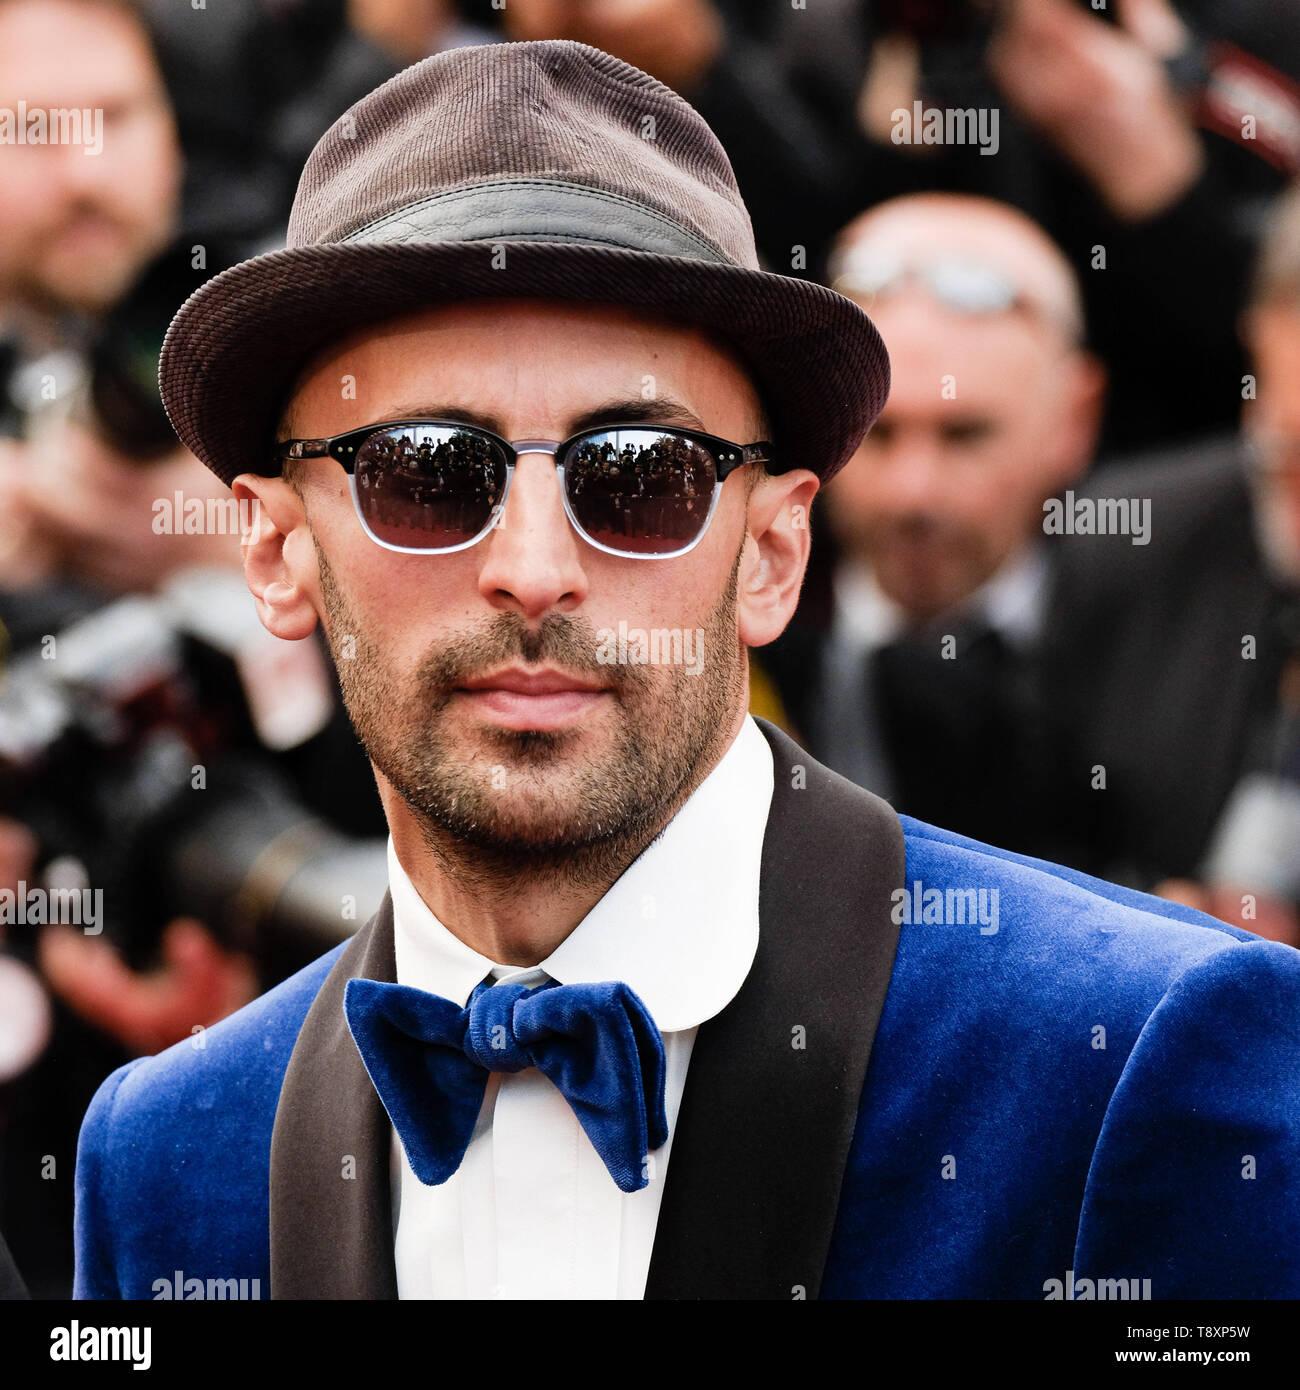 Cannes, France. 15th May 2019. French photographer J.R poses on the red carpet for Les misérables on Wednesday 15 May 2019 at the 72nd Festival de Cannes, Palais des Festivals, Cannes. Pictured: J.R. Picture by Credit: Julie Edwards/Alamy Live News Stock Photo